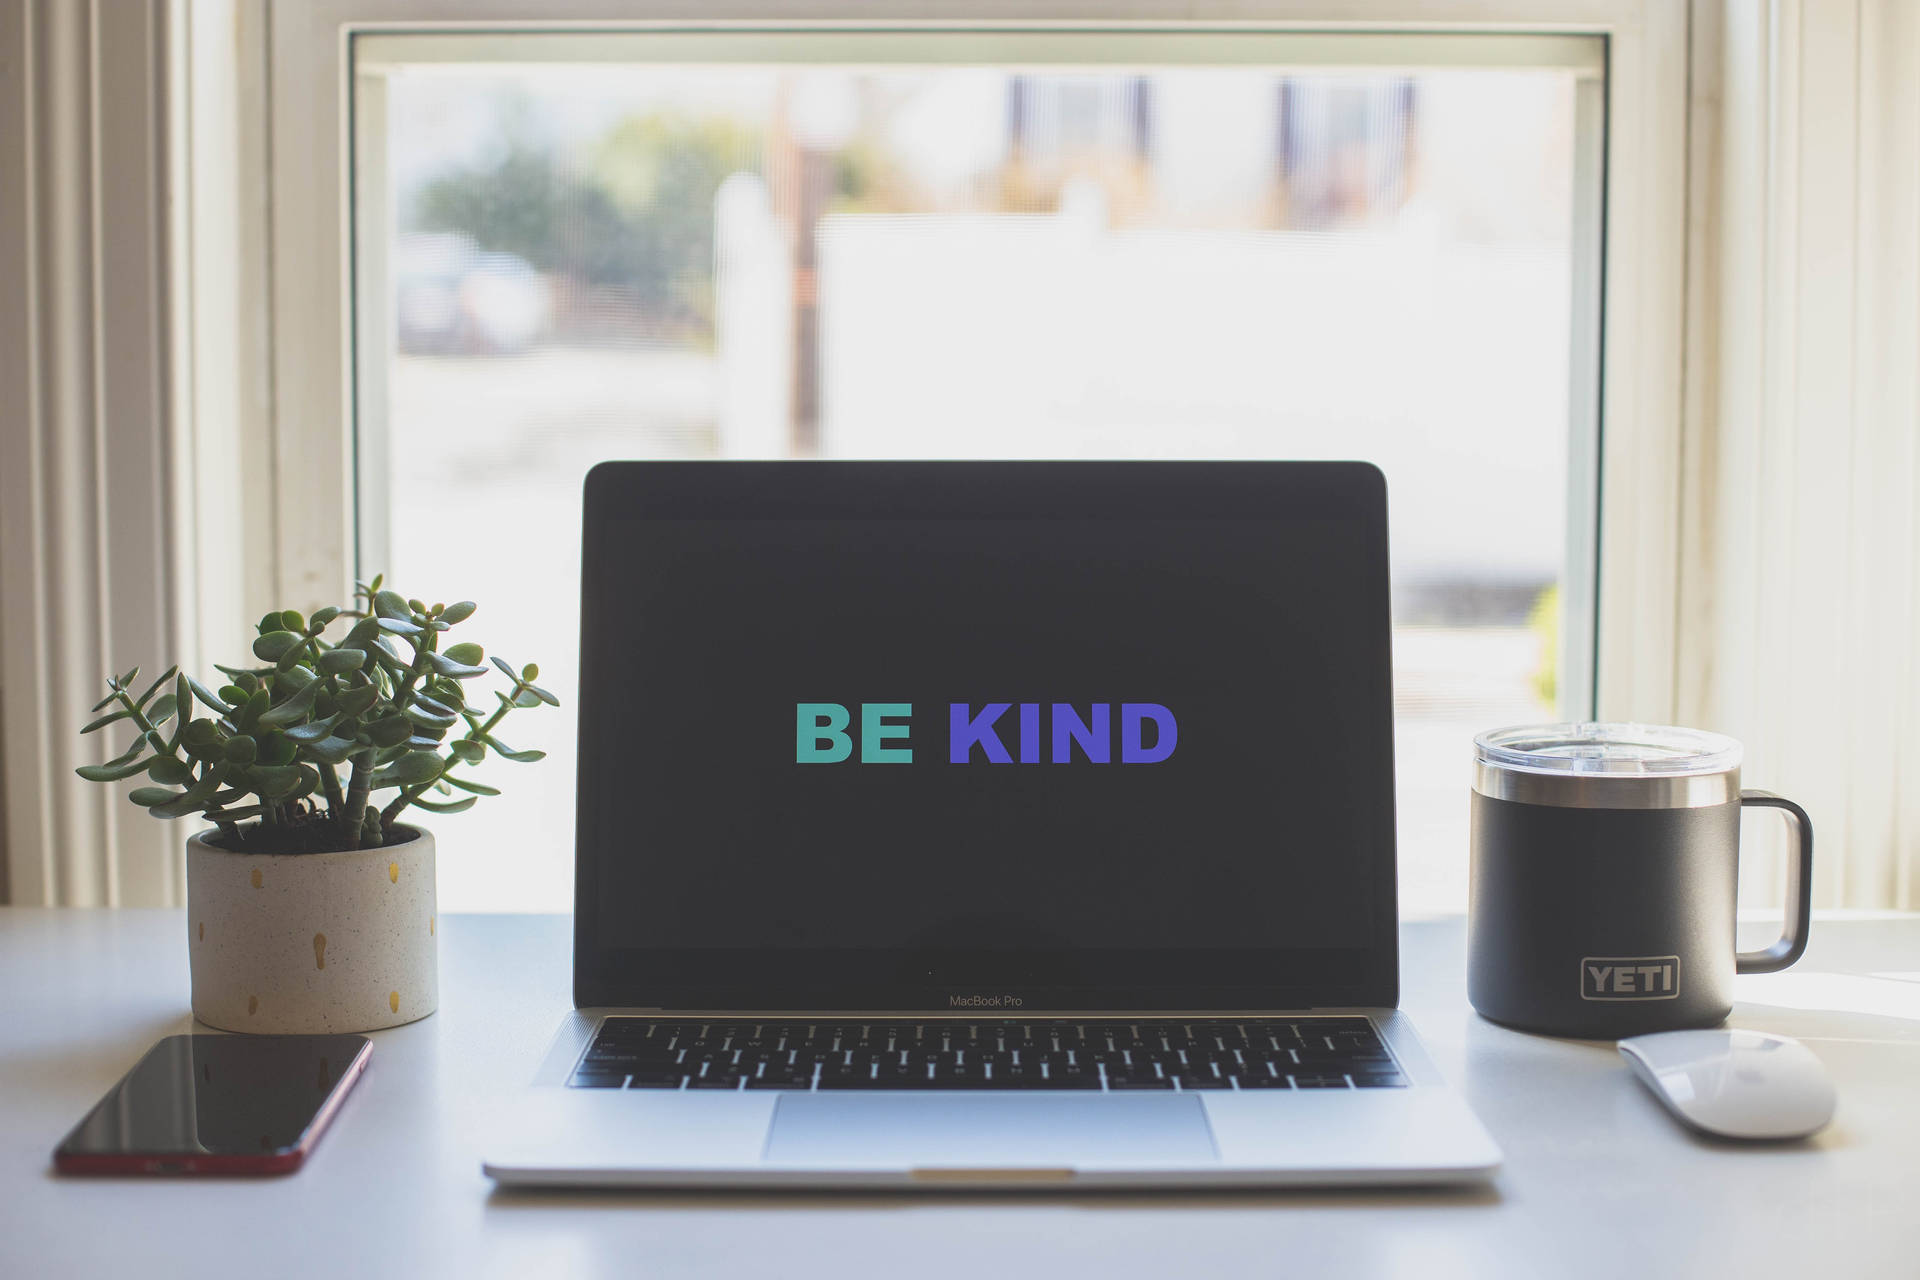 Be Kind Motivational Quote On Screen